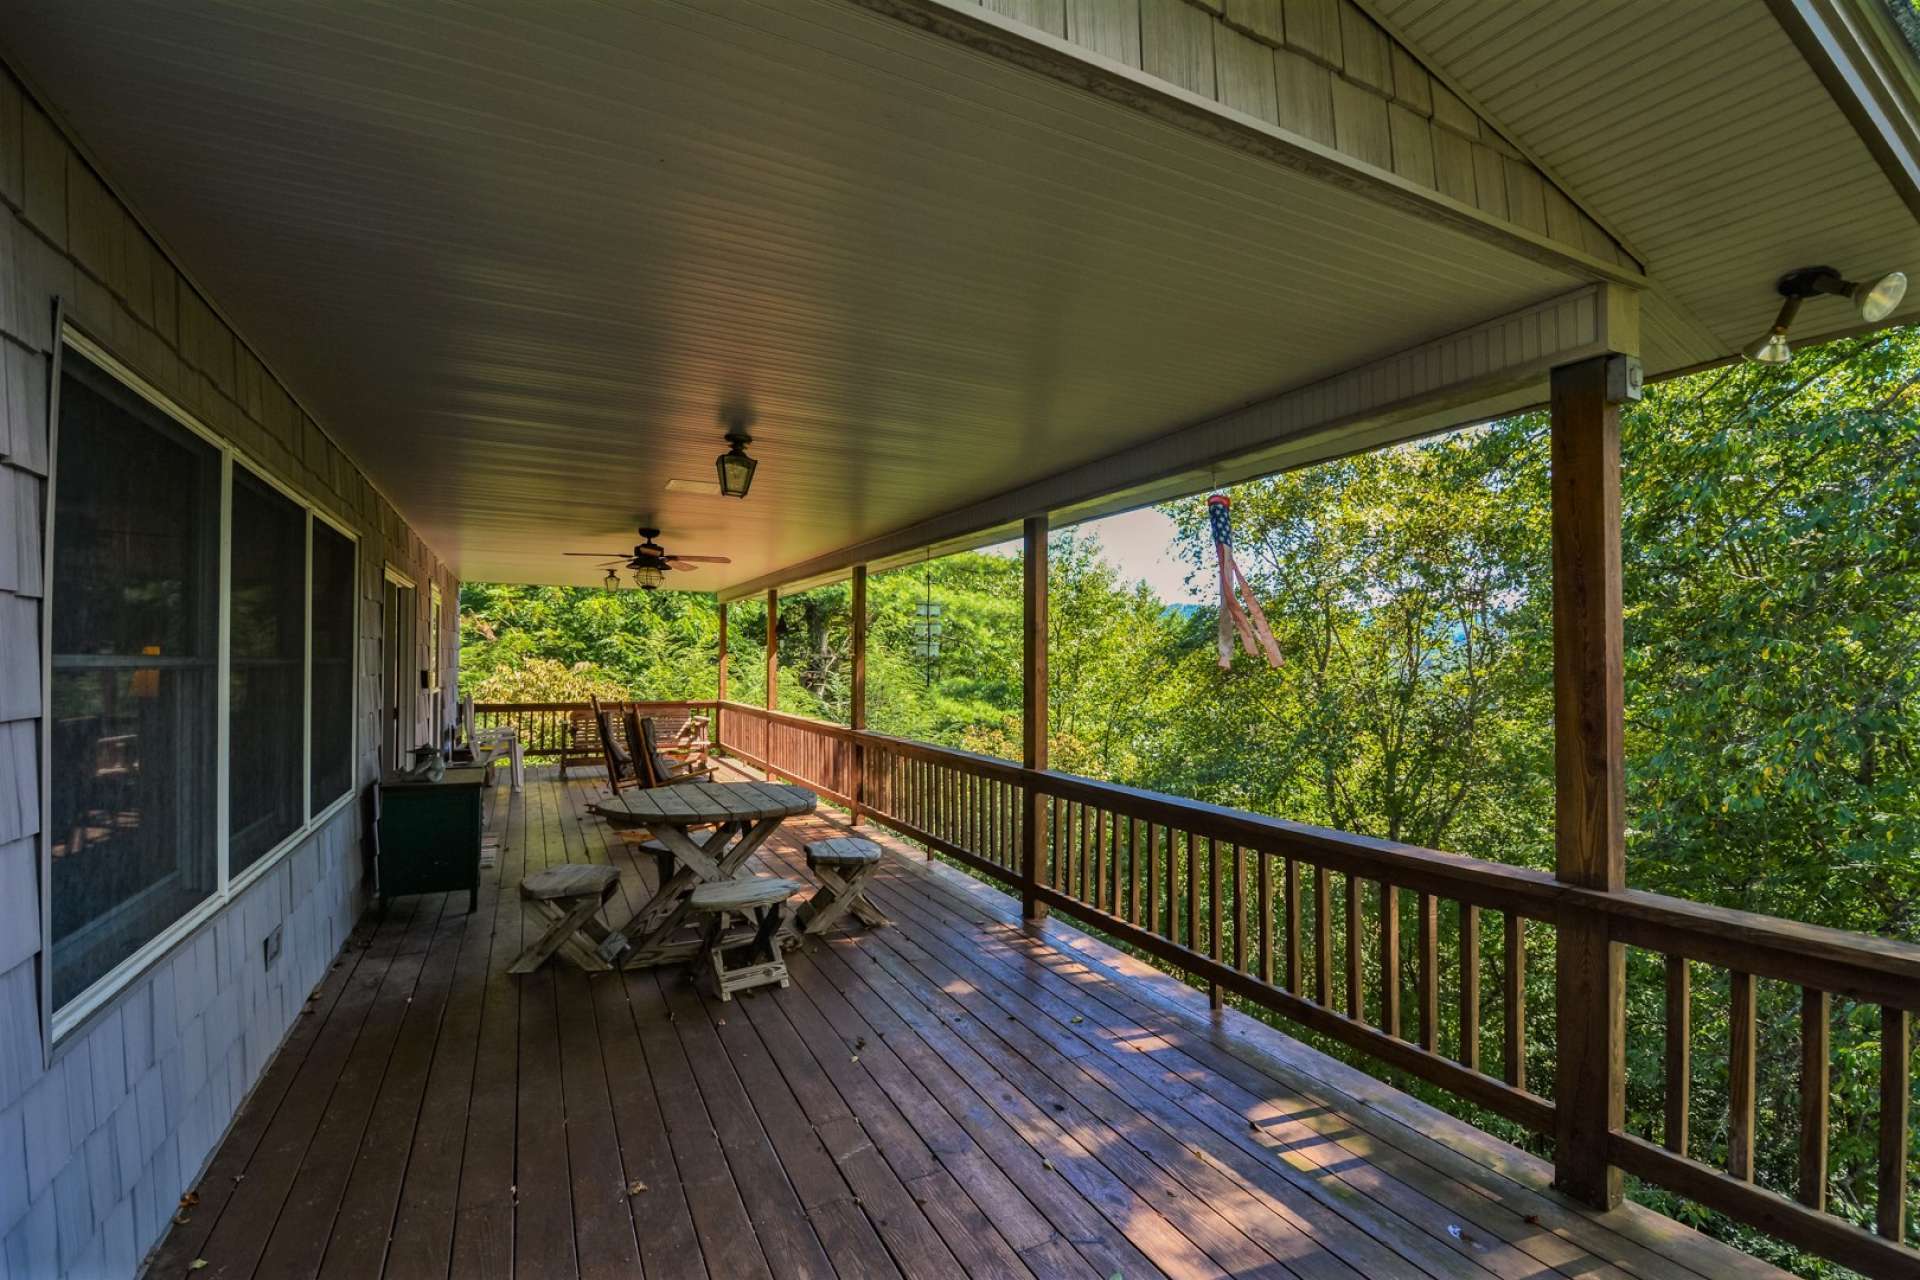 Relax on the long covered back deck and enjoy the wooded surroundings  and the gentle mountain breezes whispering through the trees.